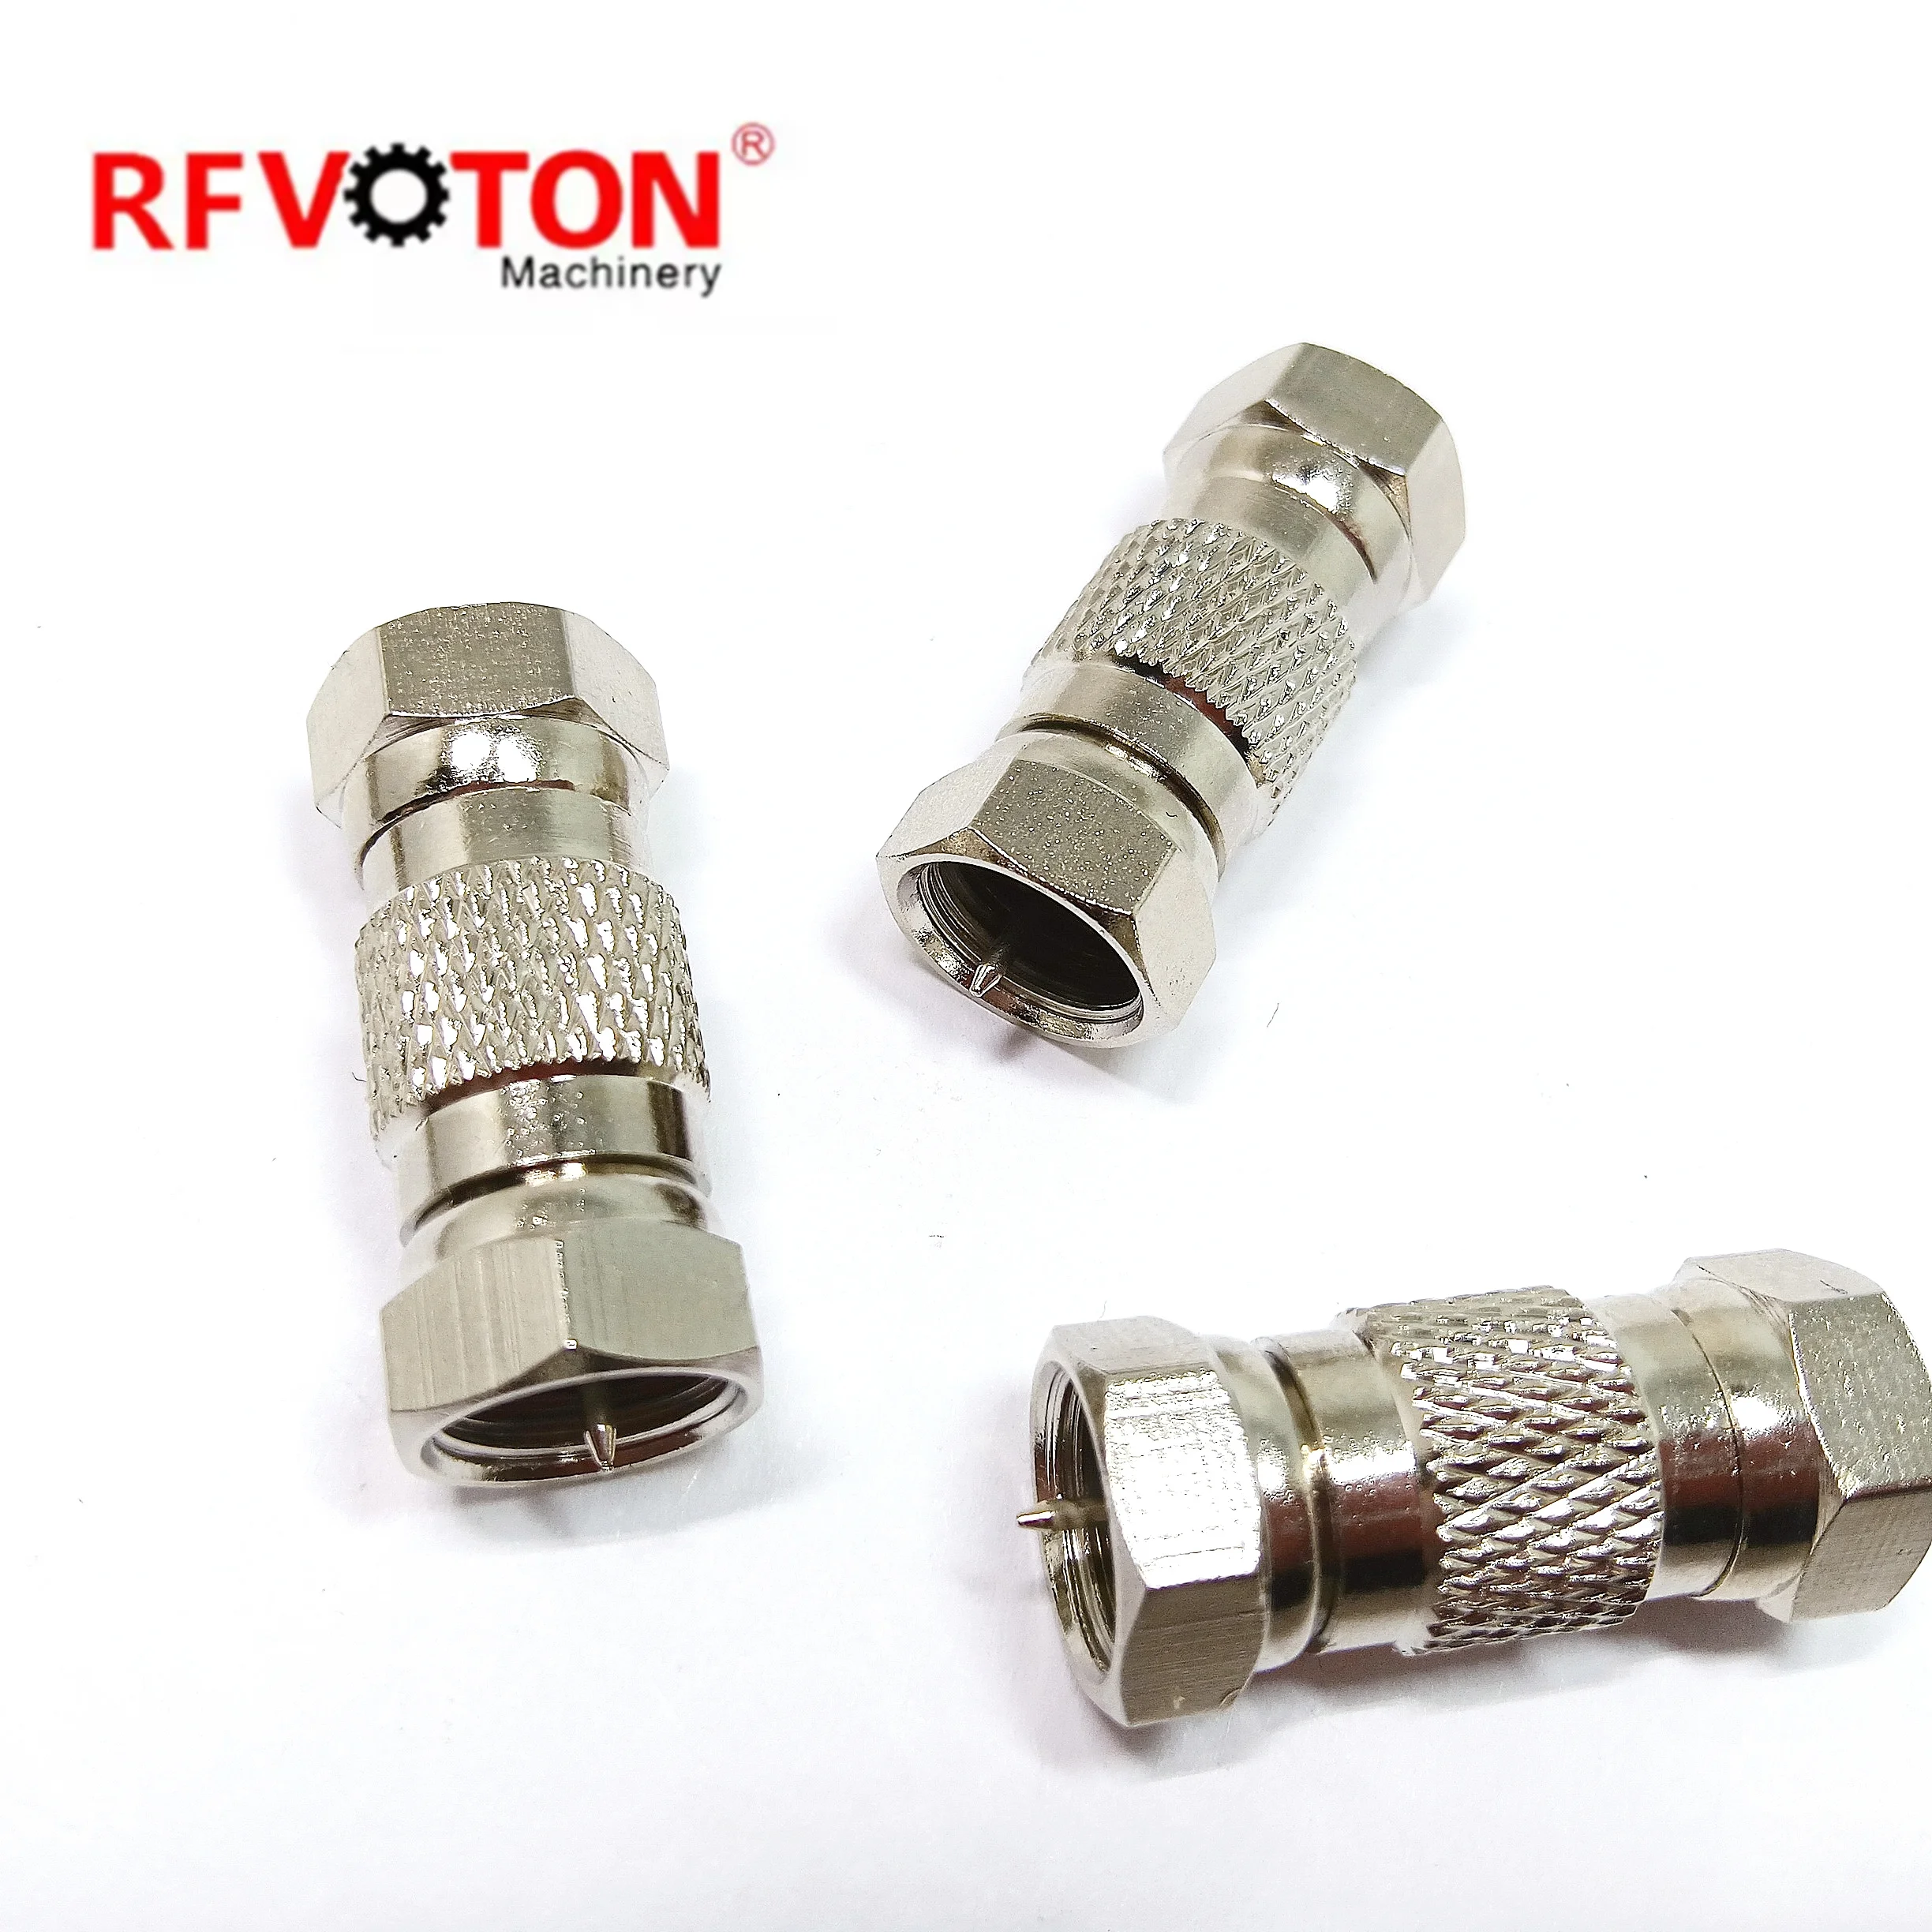 Wholesale F Male to Male Coax Connector 75 Ohm F Type RG6 Coaxial Cable Adapter Cable Extension Coupler for TV Antenna manufacture